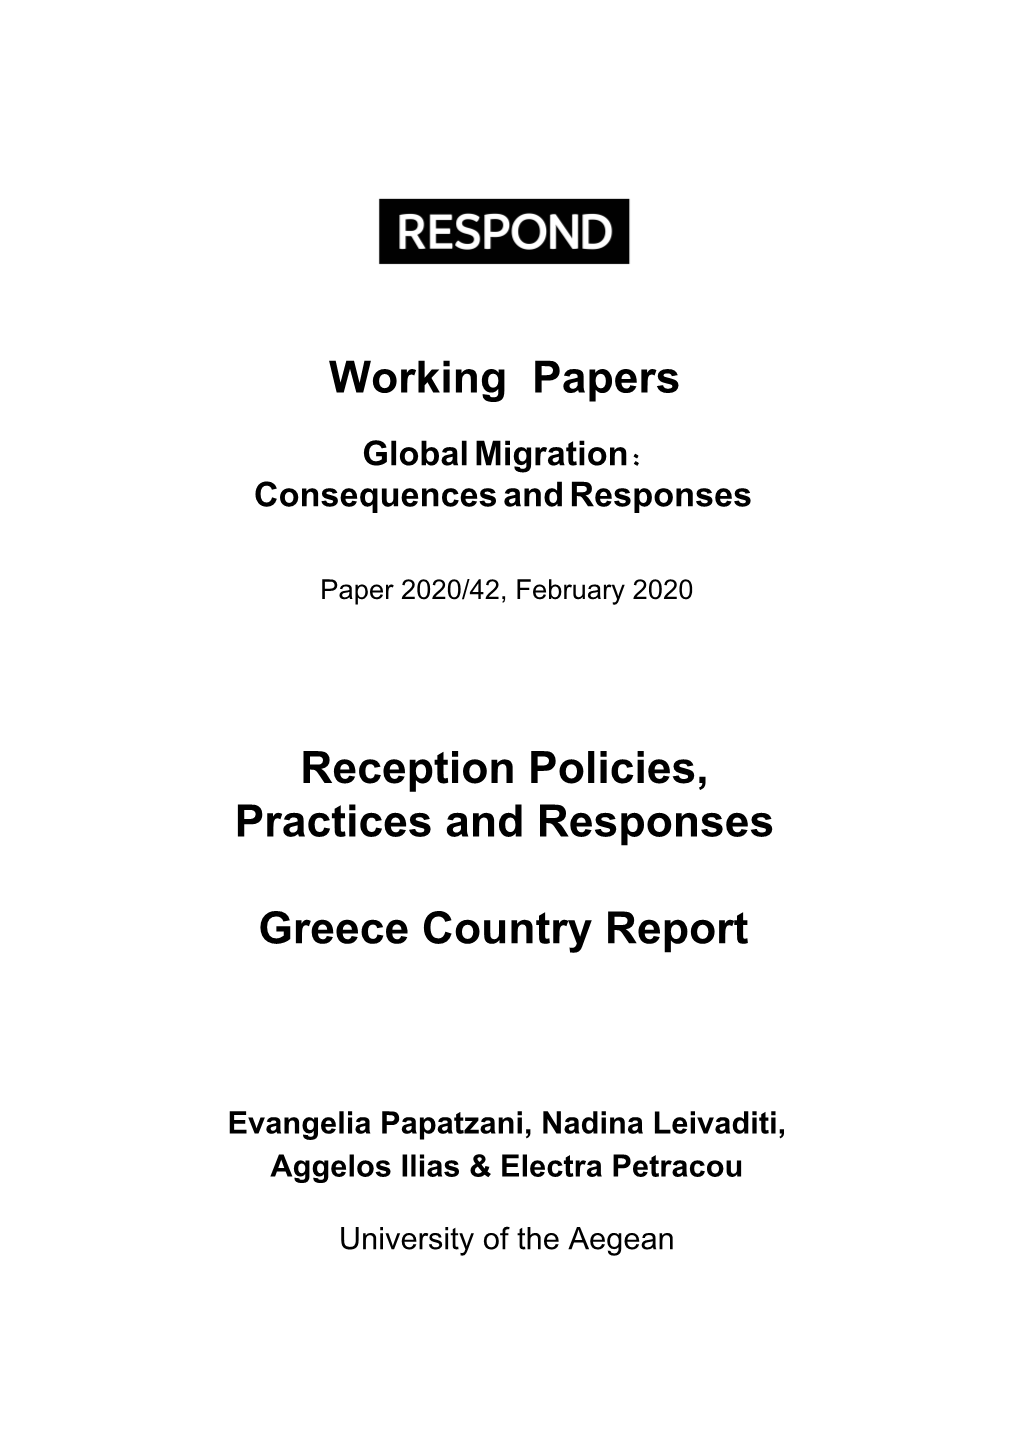 Reception Policies, Practices and Responses Greece Country Report